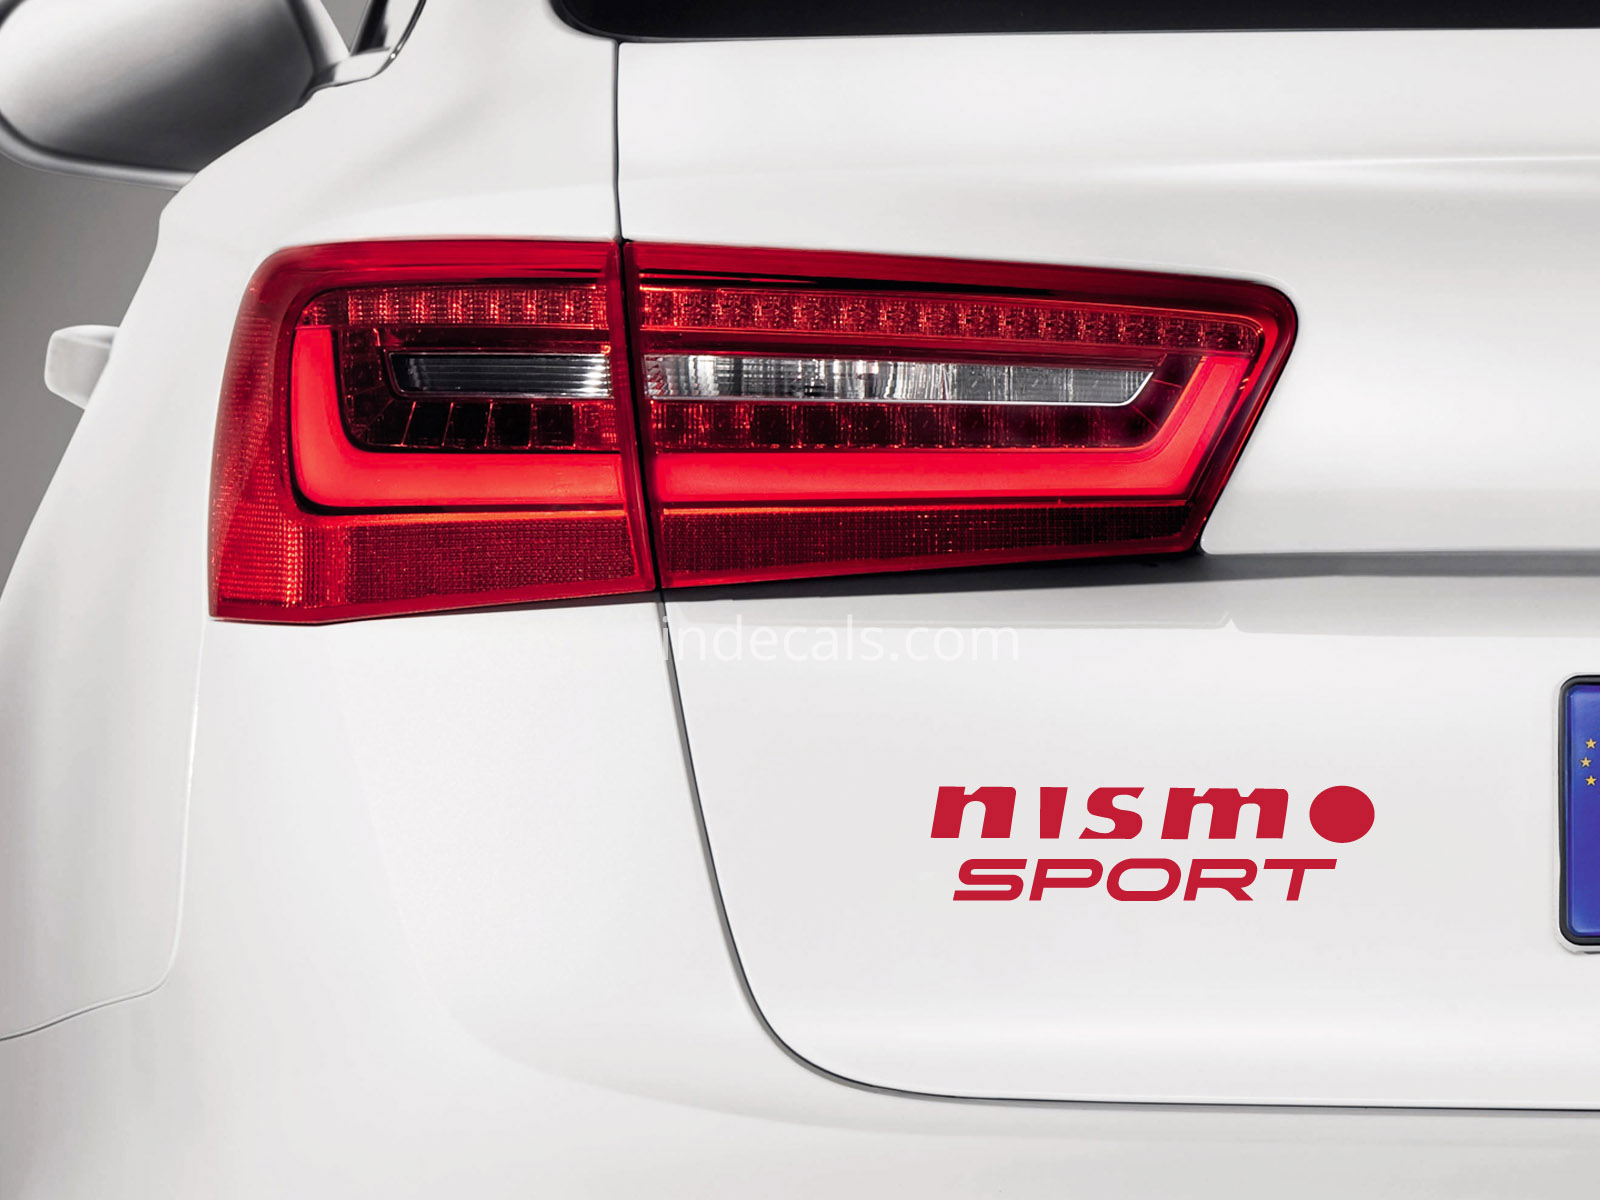 1 x Nismo Sports Sticker for Trunk - Red